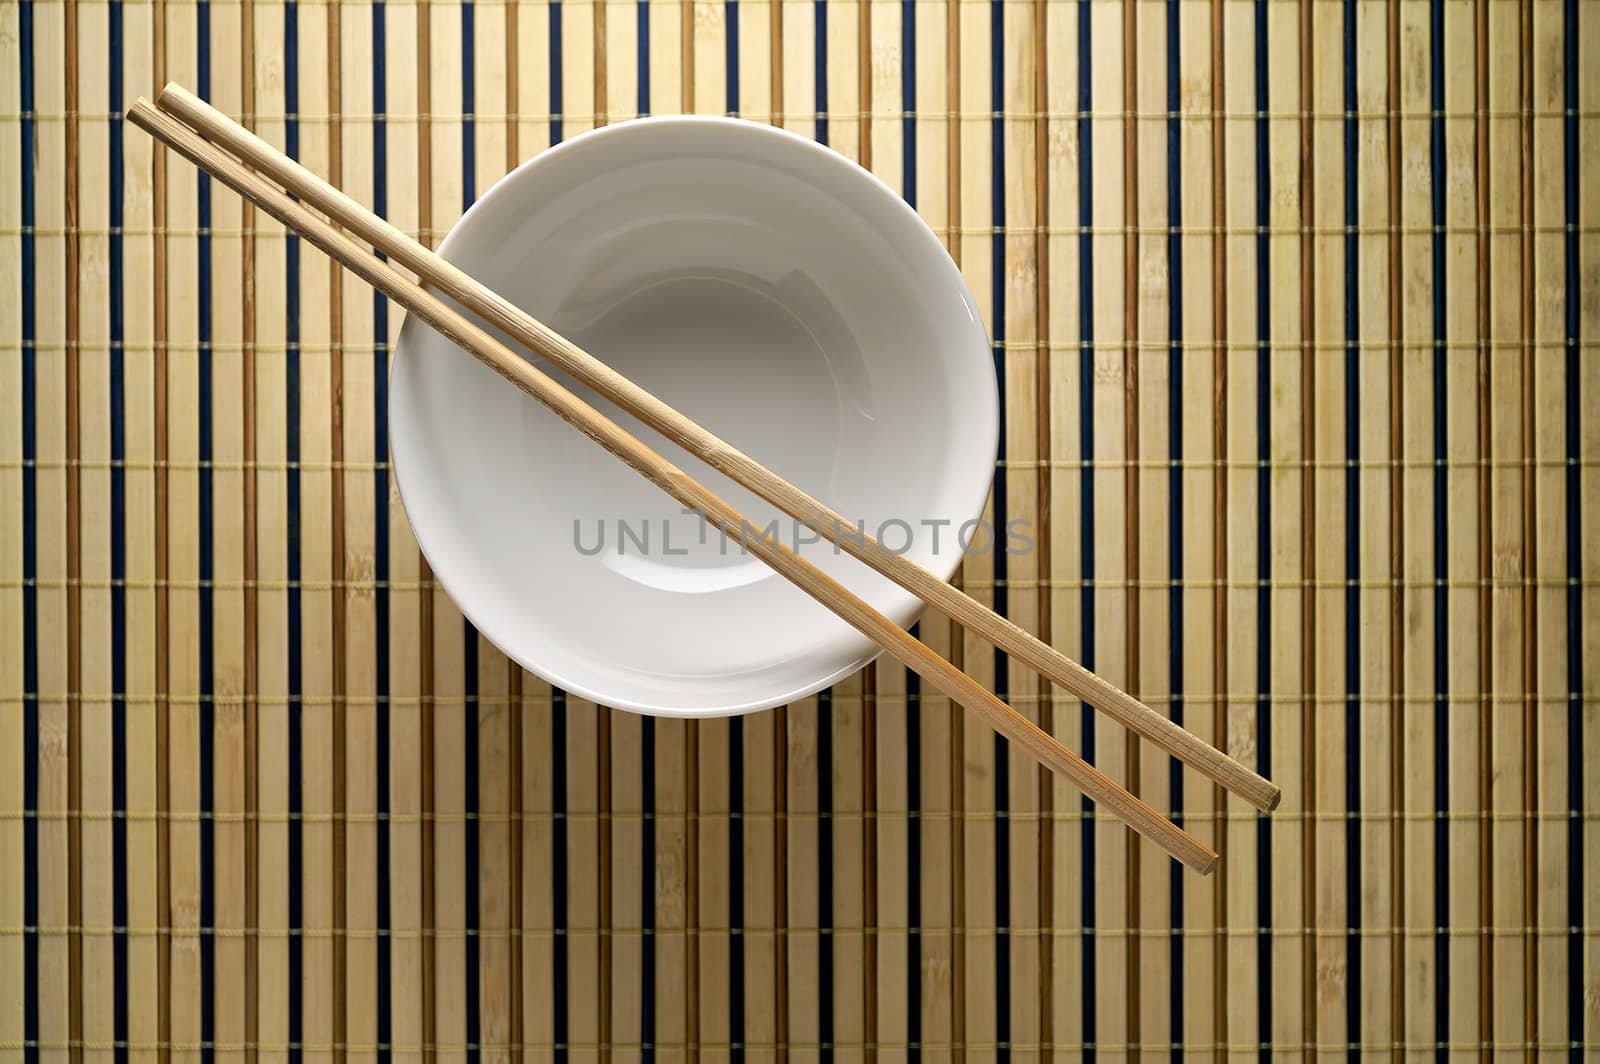 Bowl and chopsticks on bamboo mat by Laborer